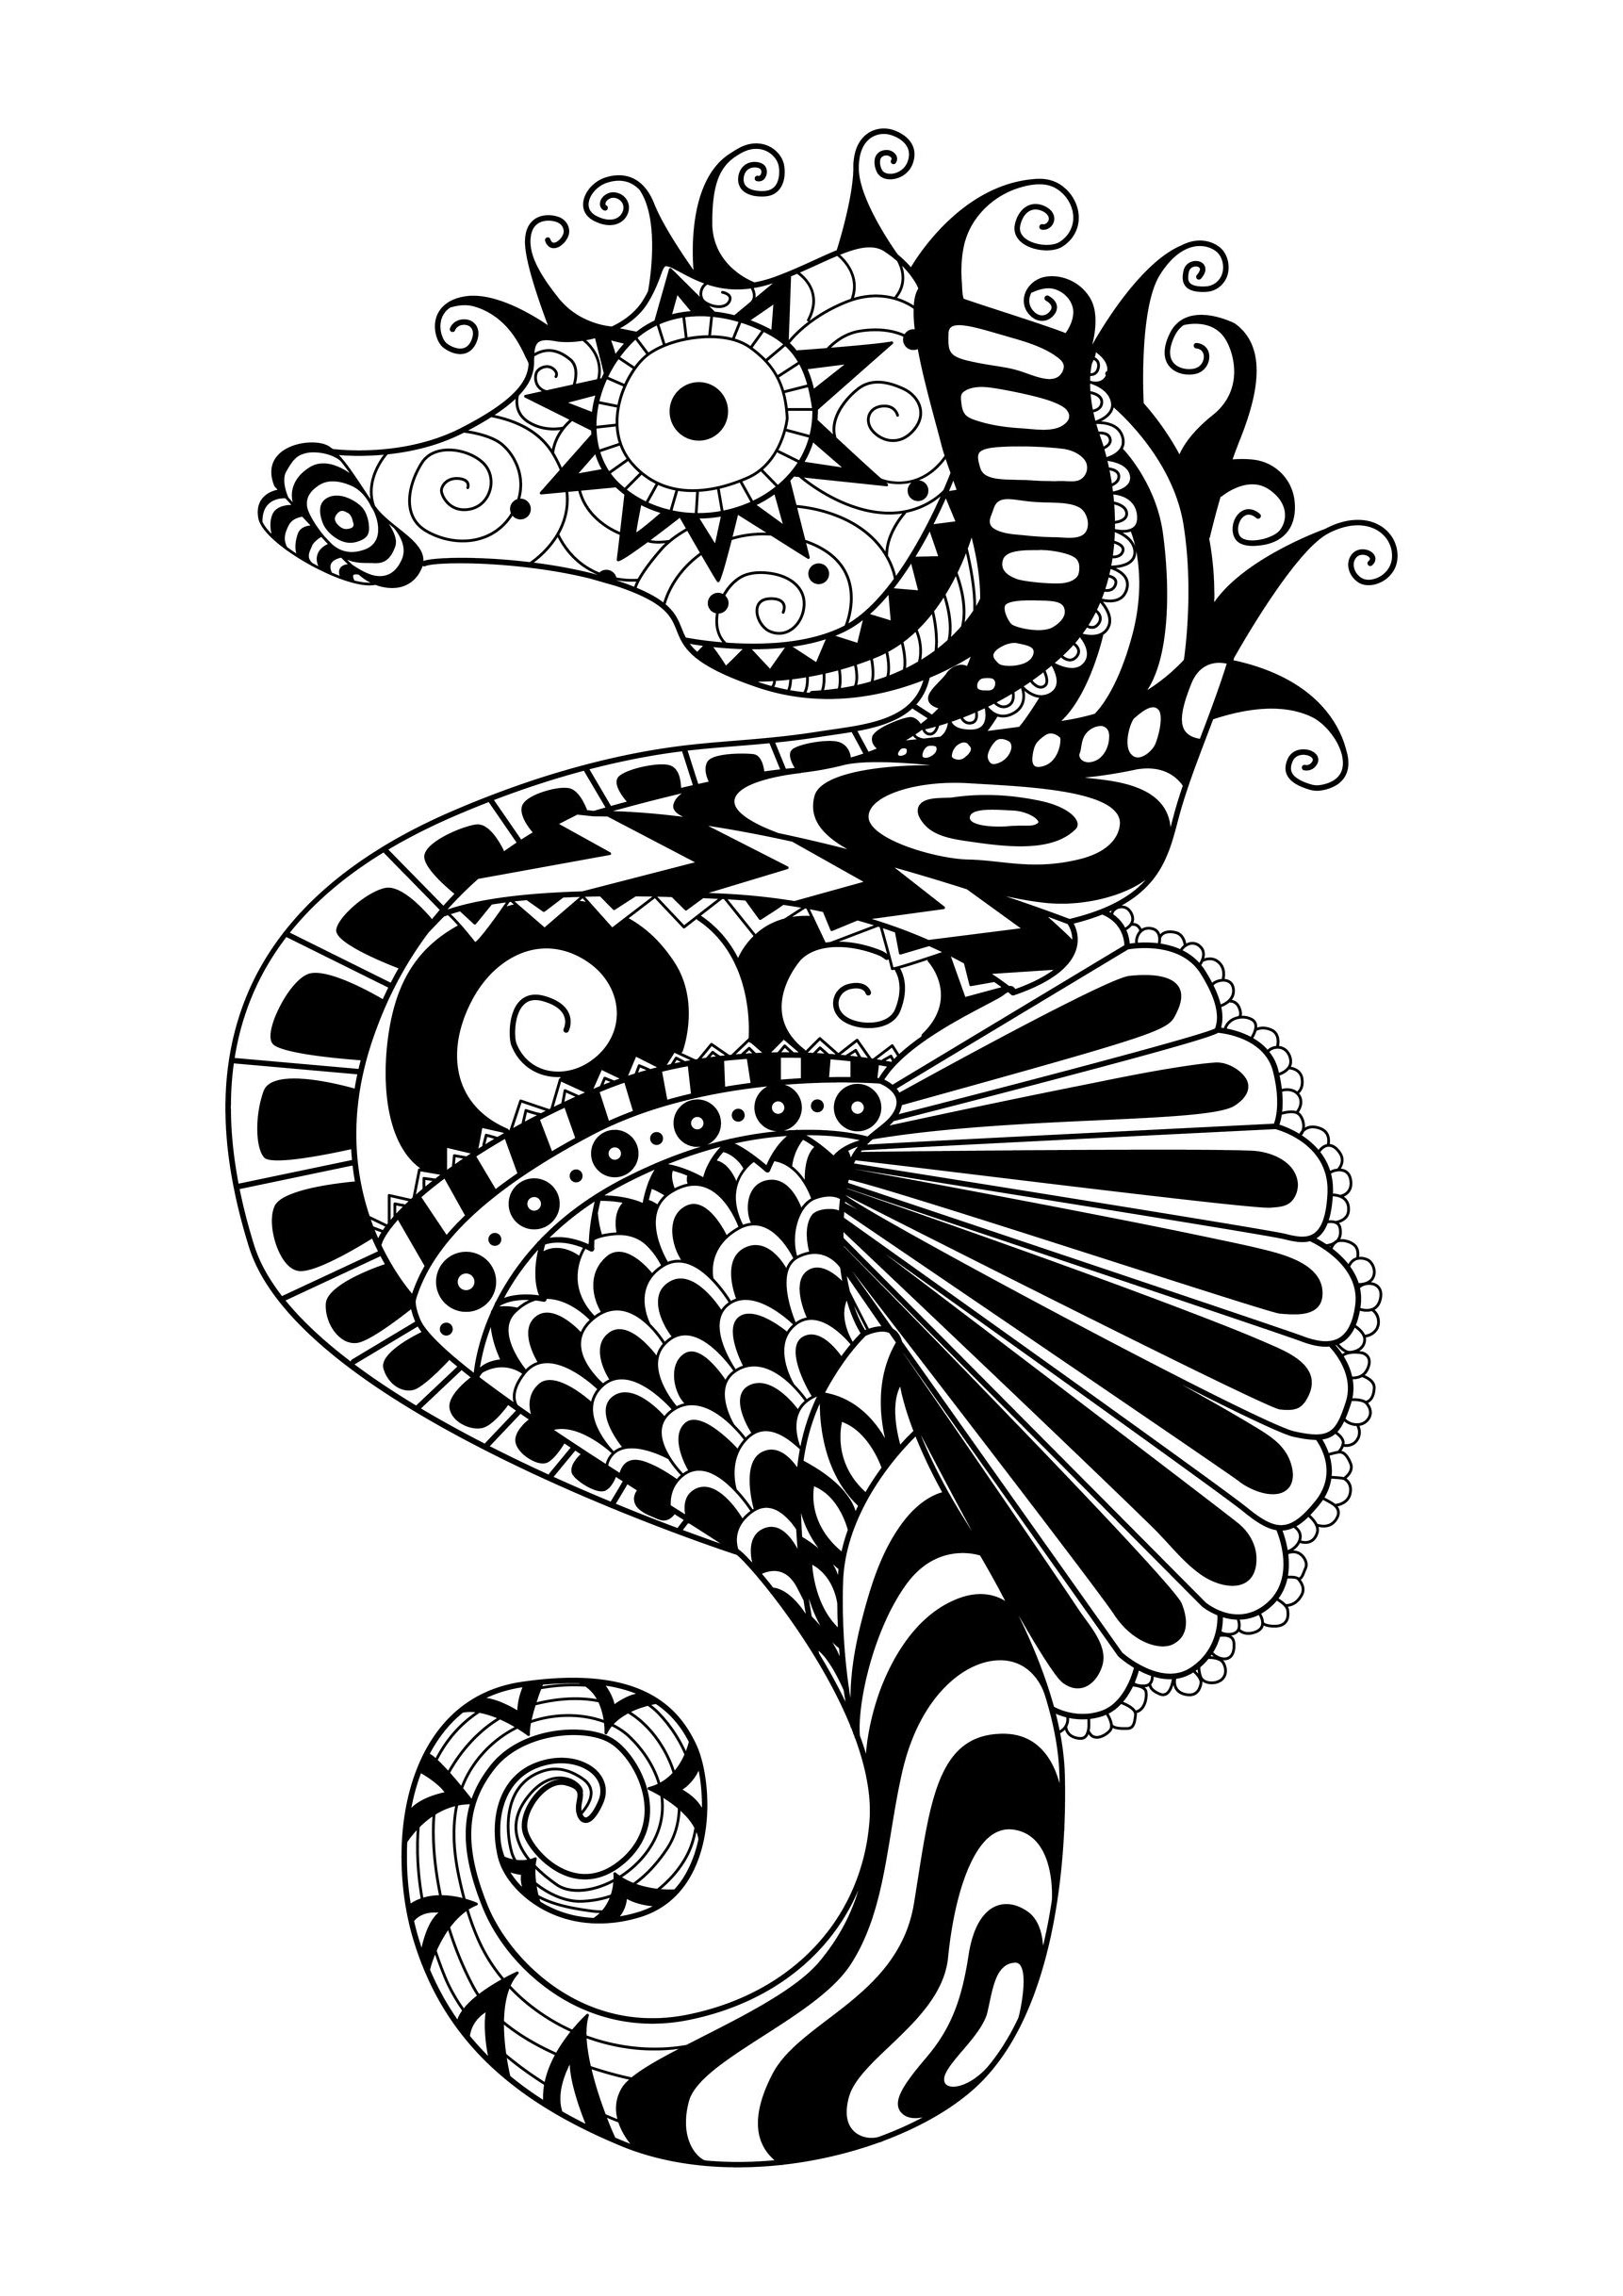 Zentangle - Coloring pages for adults : coloring-adult-zentangle-sea